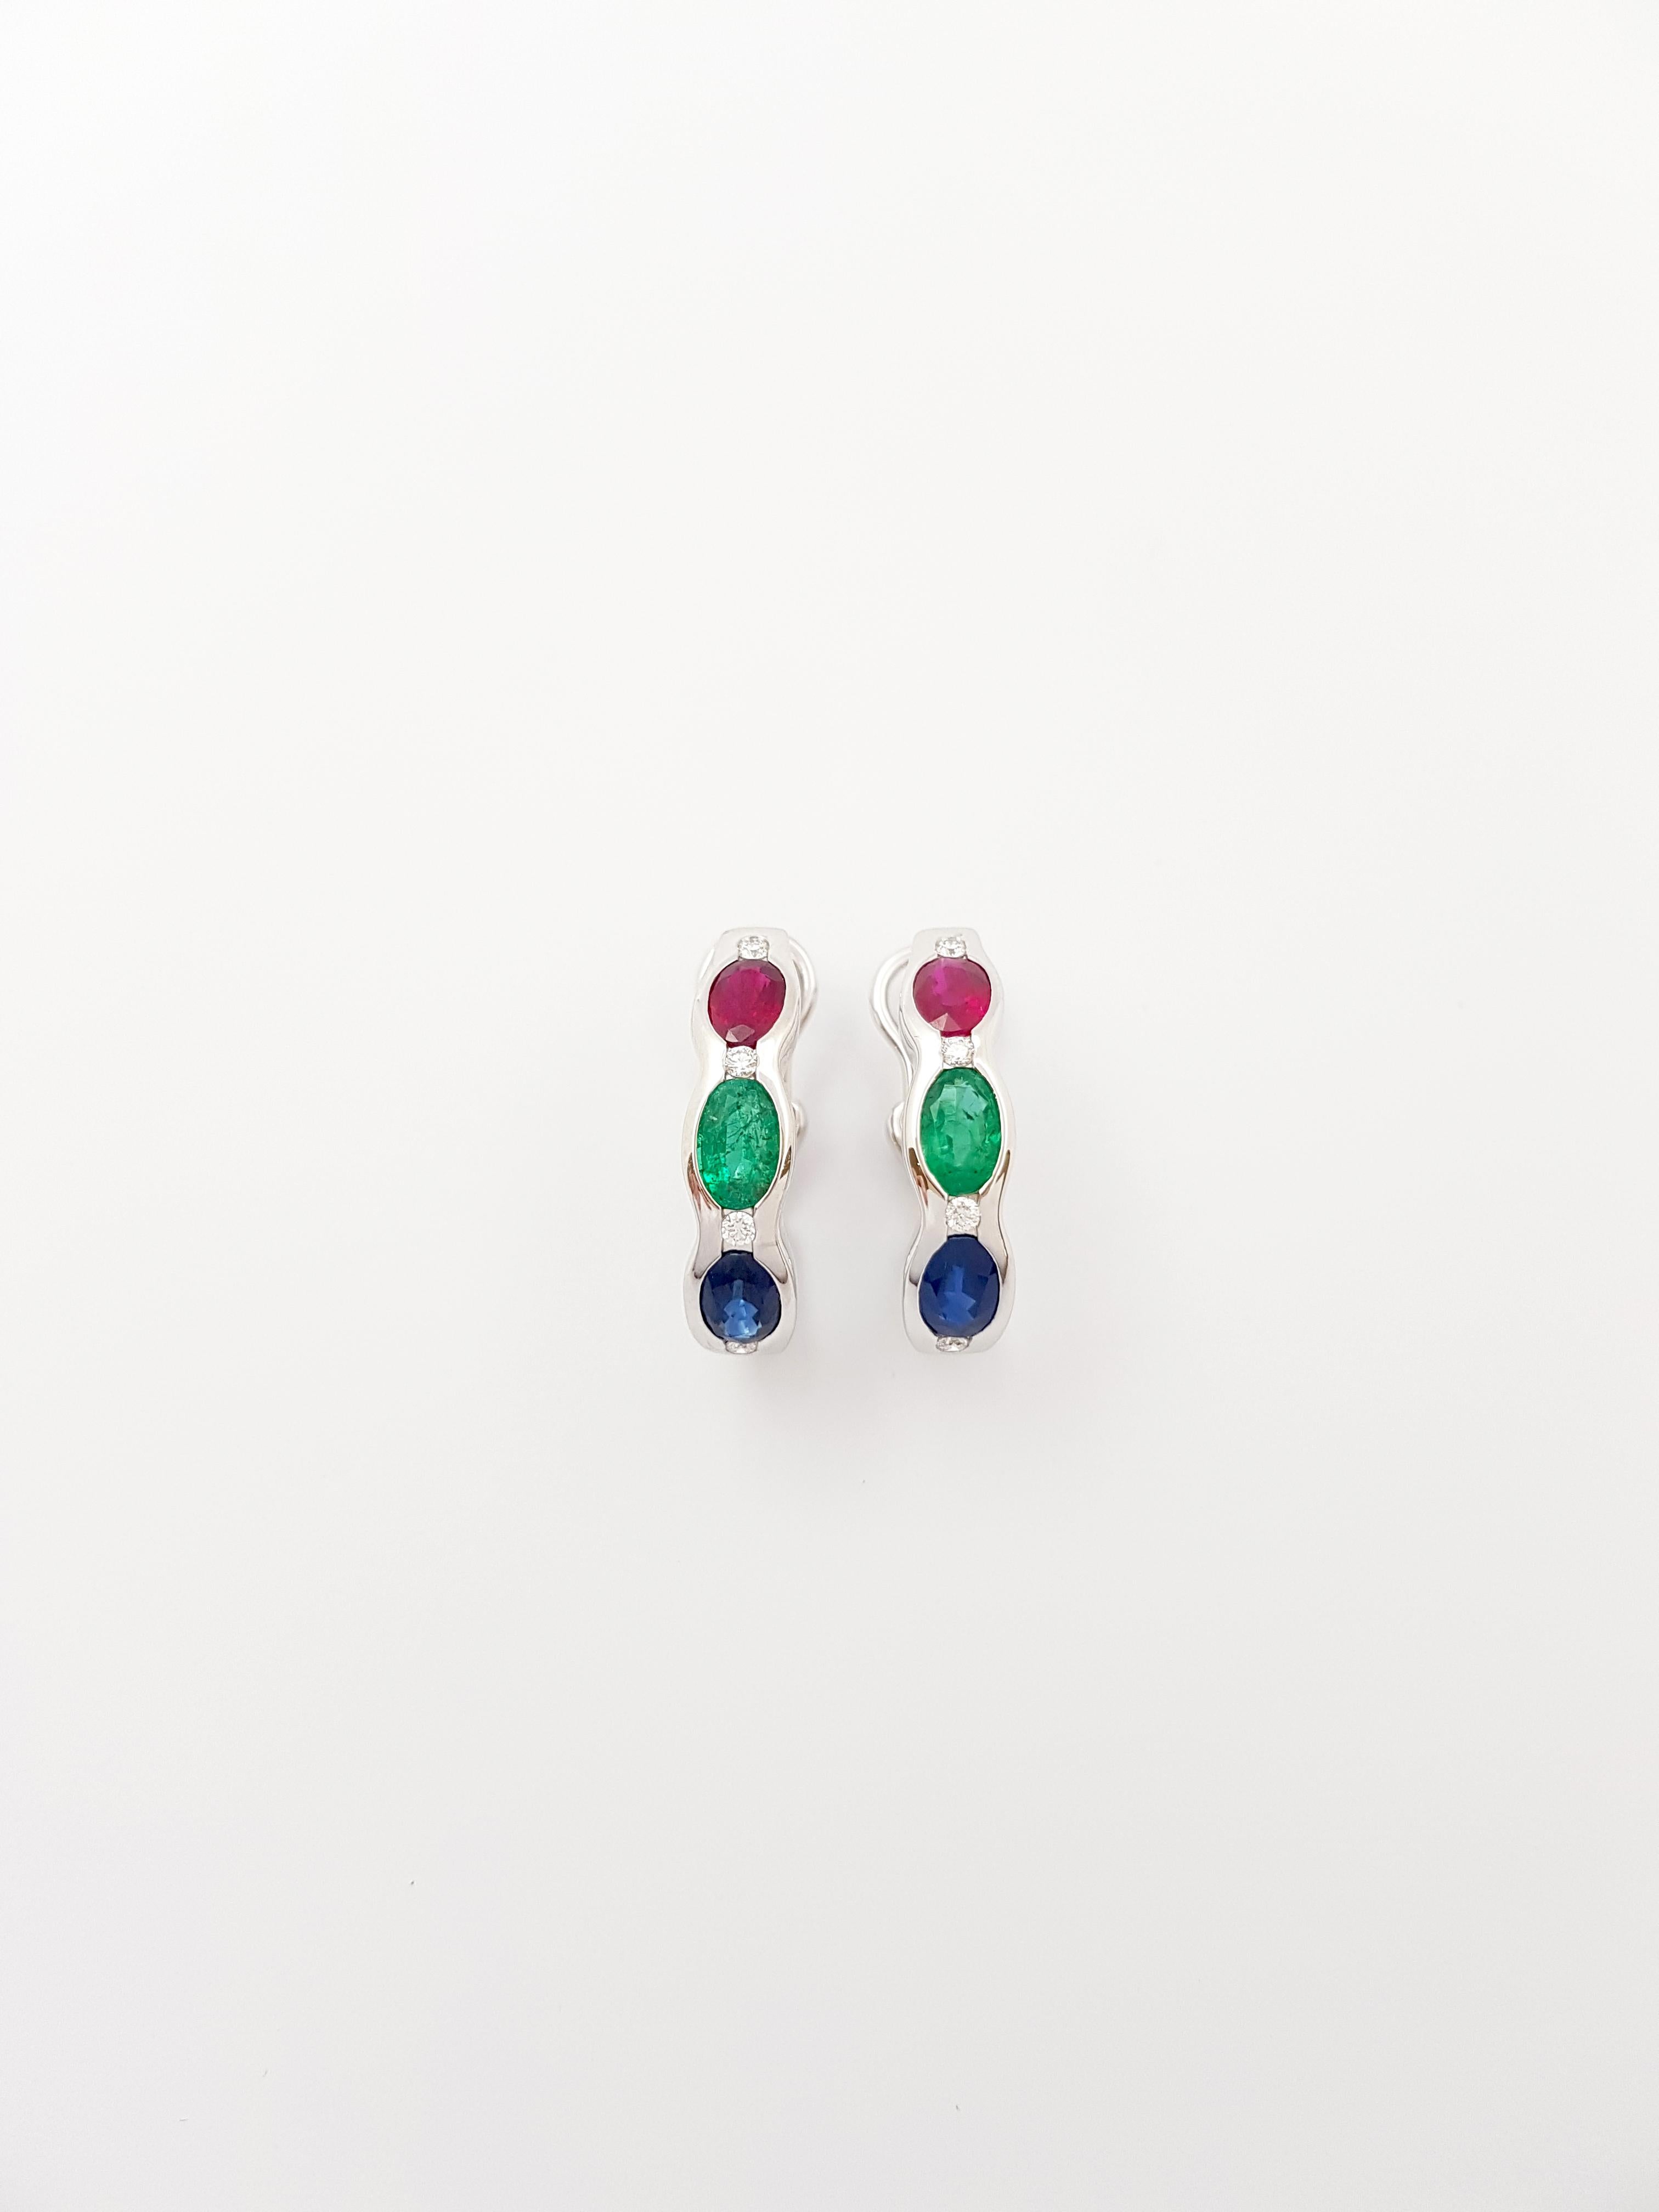 Contemporary Ruby, Blue Sapphire, Emerald and Diamond Earrings set in 18K White Gold Settings For Sale